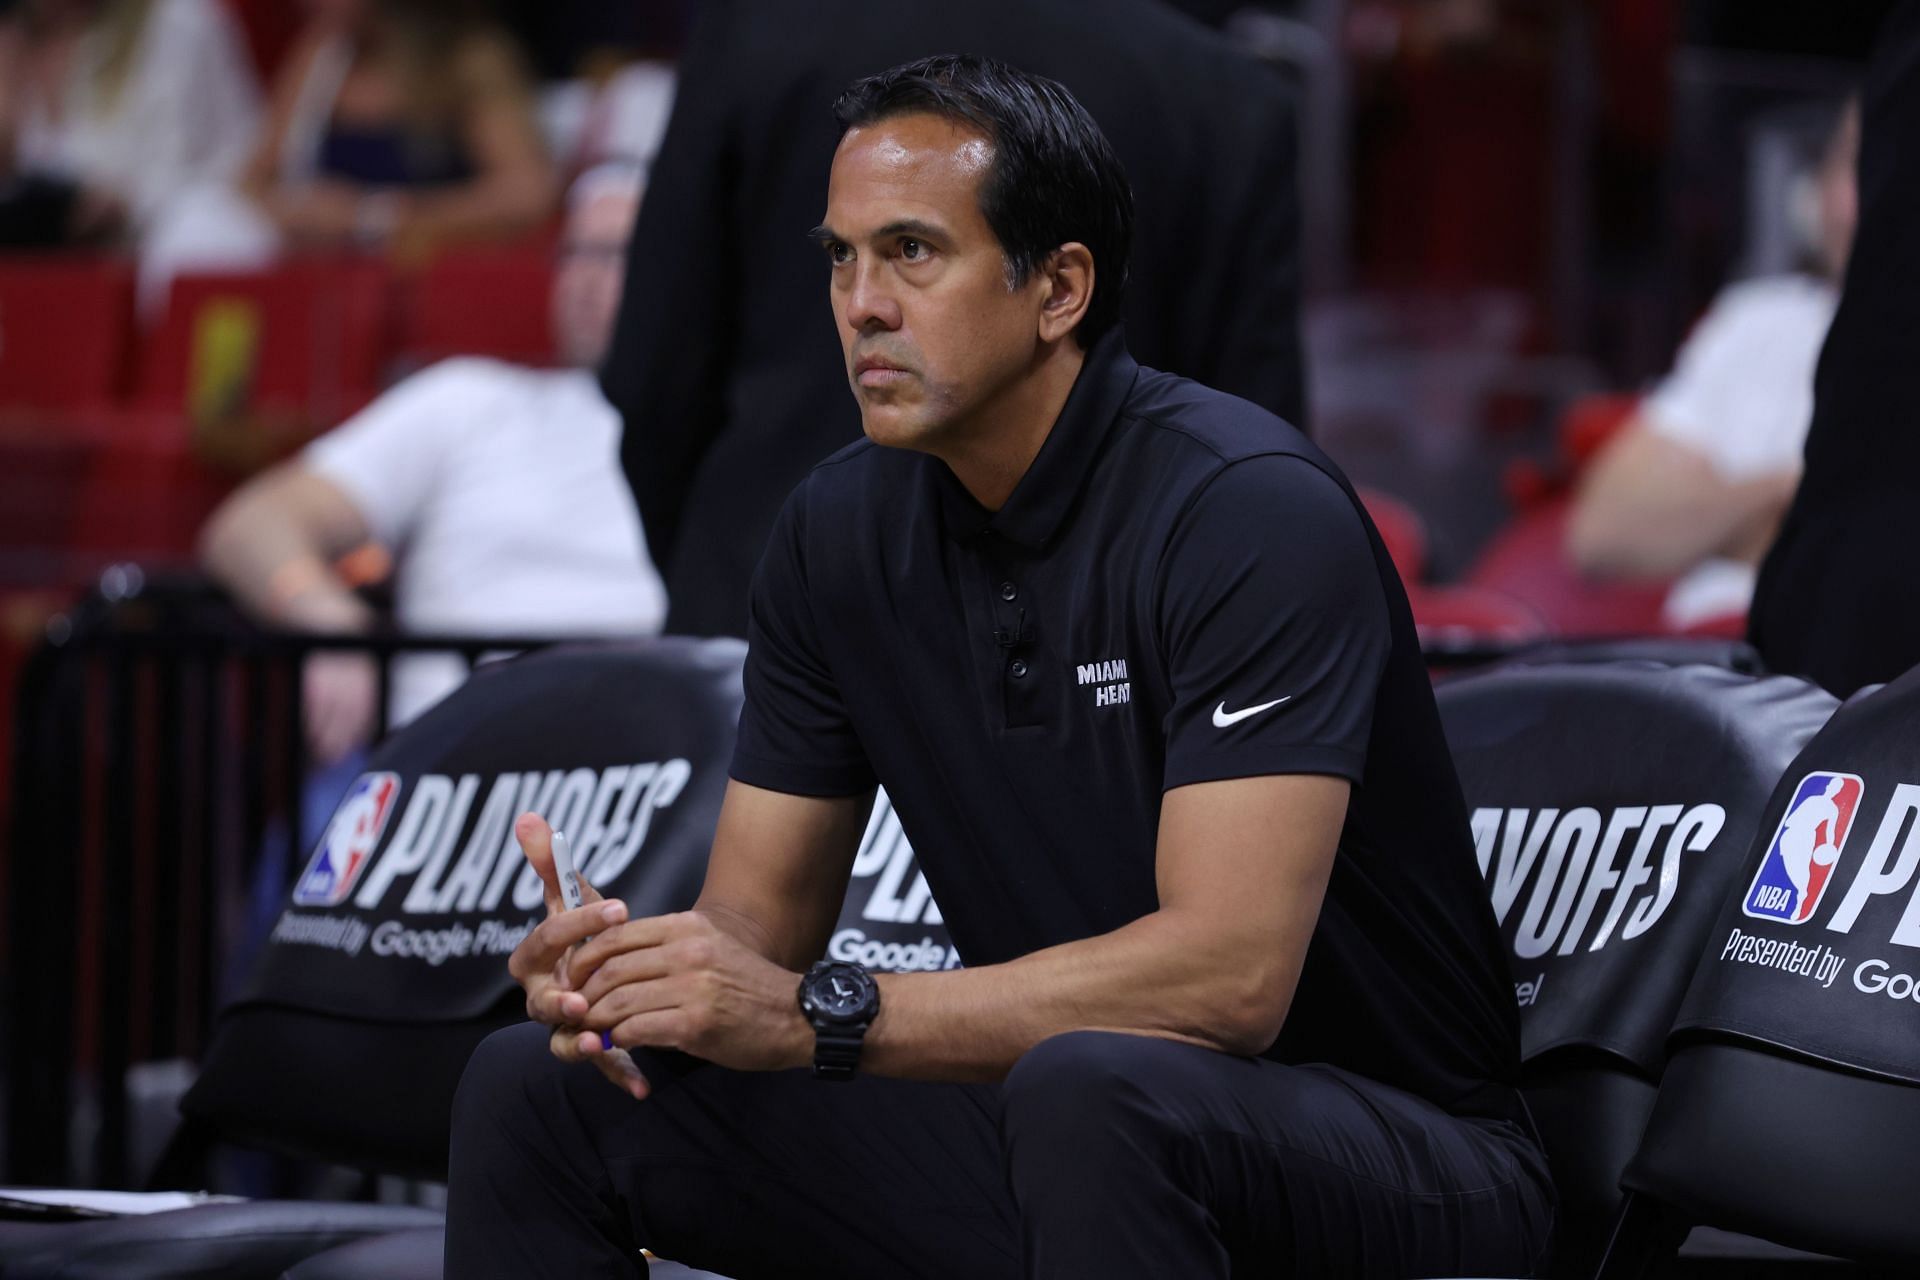 “We’re gonna go up there and get it done” Erik Spoelstra determined